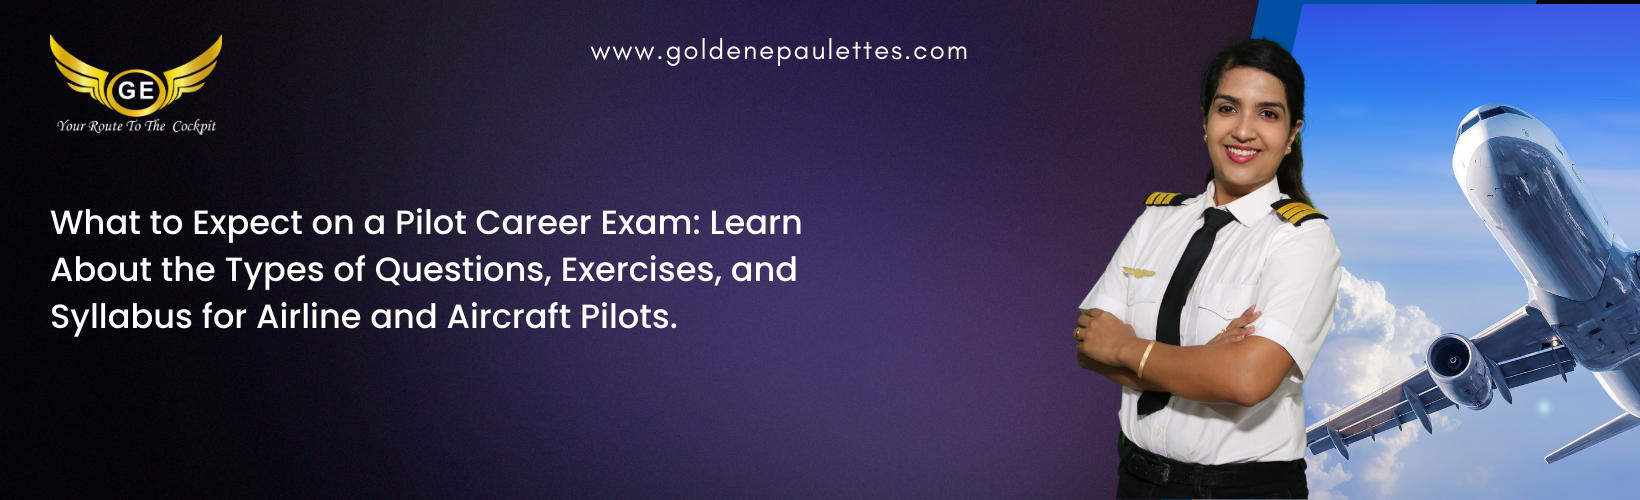 How to Prepare for an Airline Pilot Certification Exam